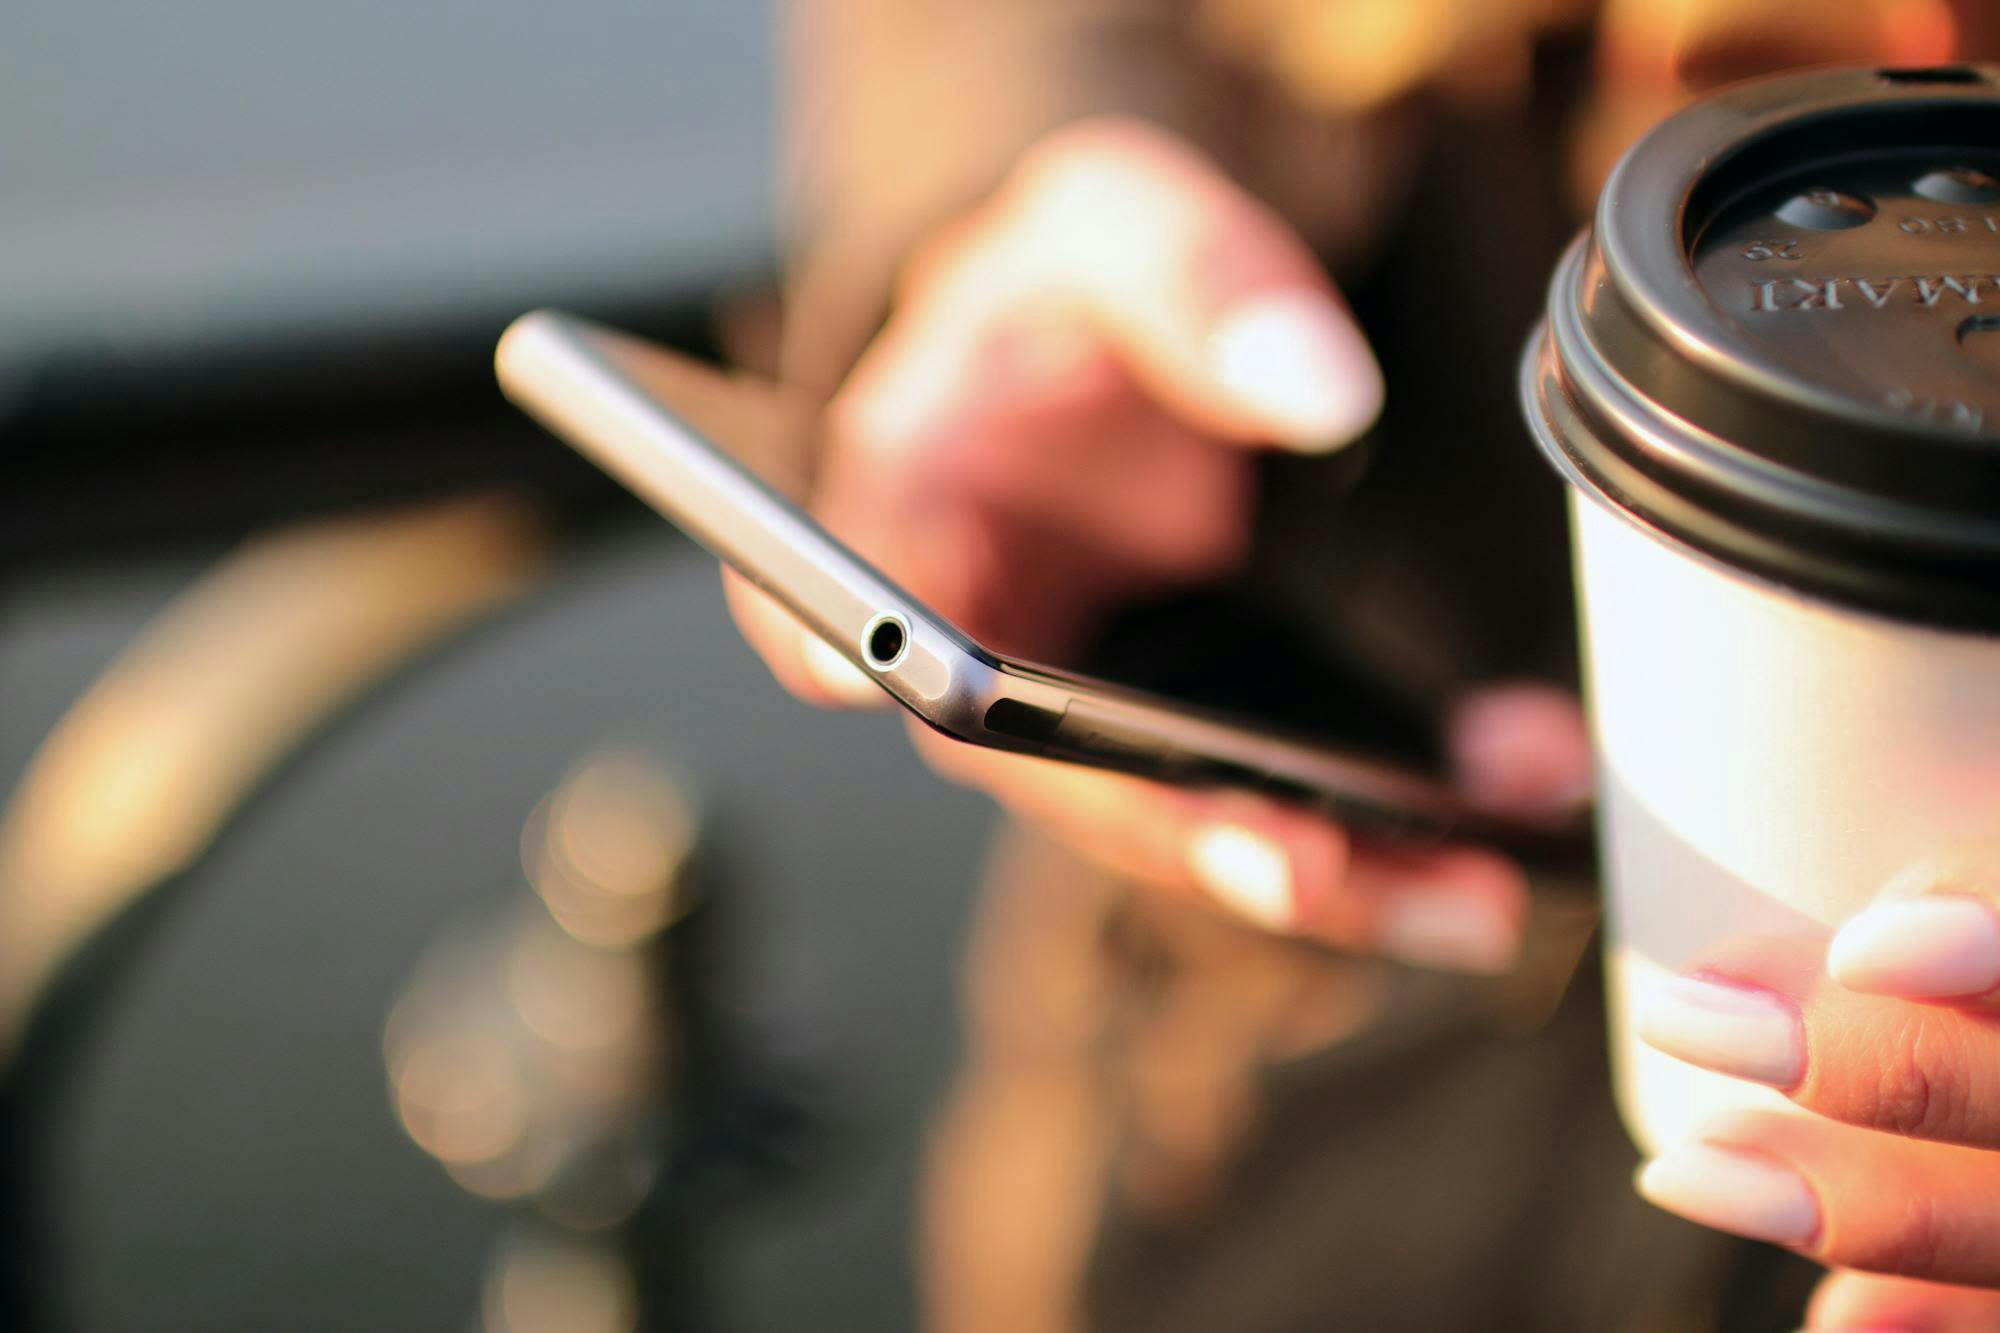 Close-up photo of a woman's hand holding a phone and coffee cup